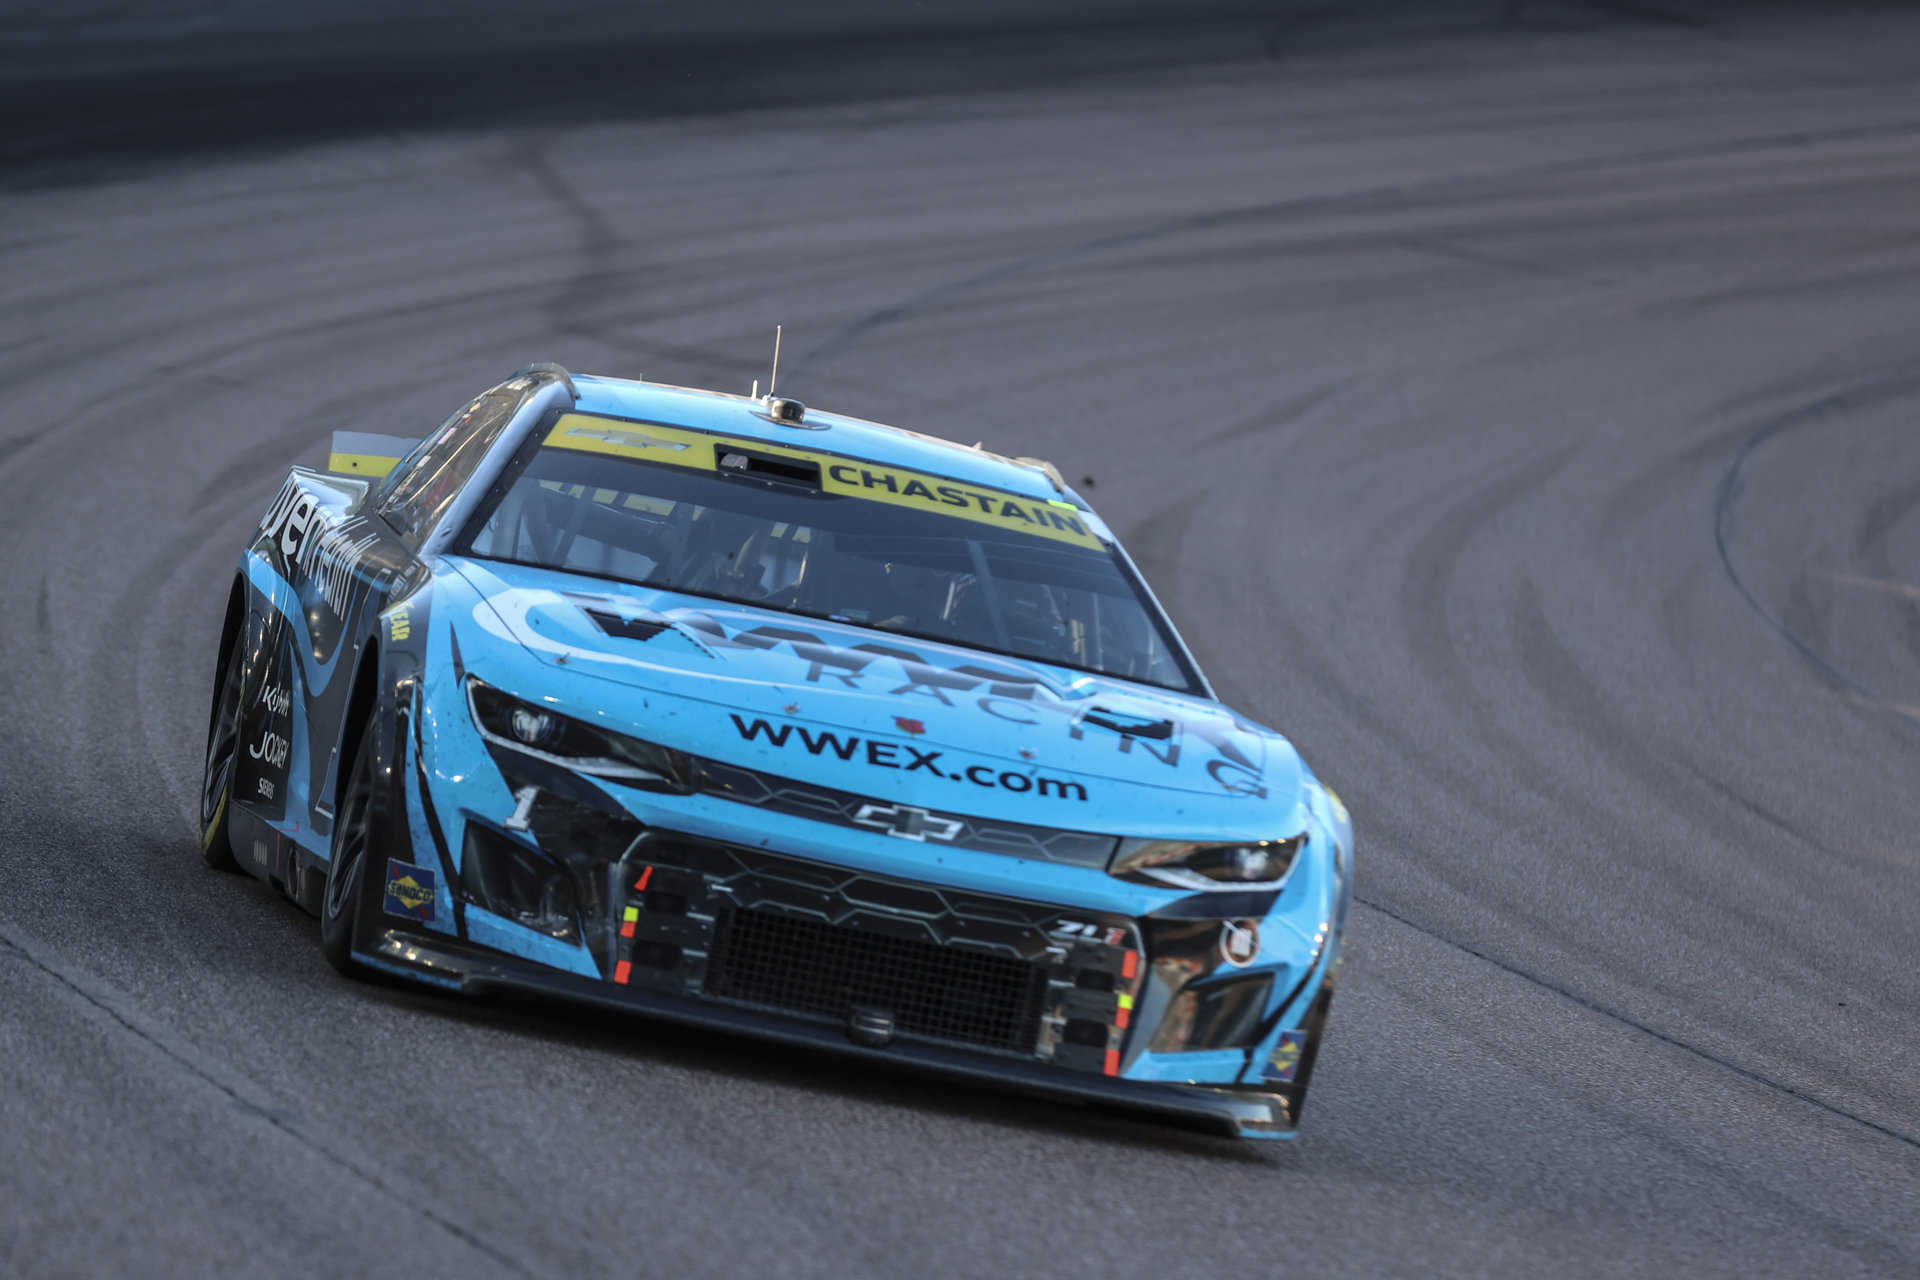 Ross chastain races in the championship 4 at phoenix raceway.